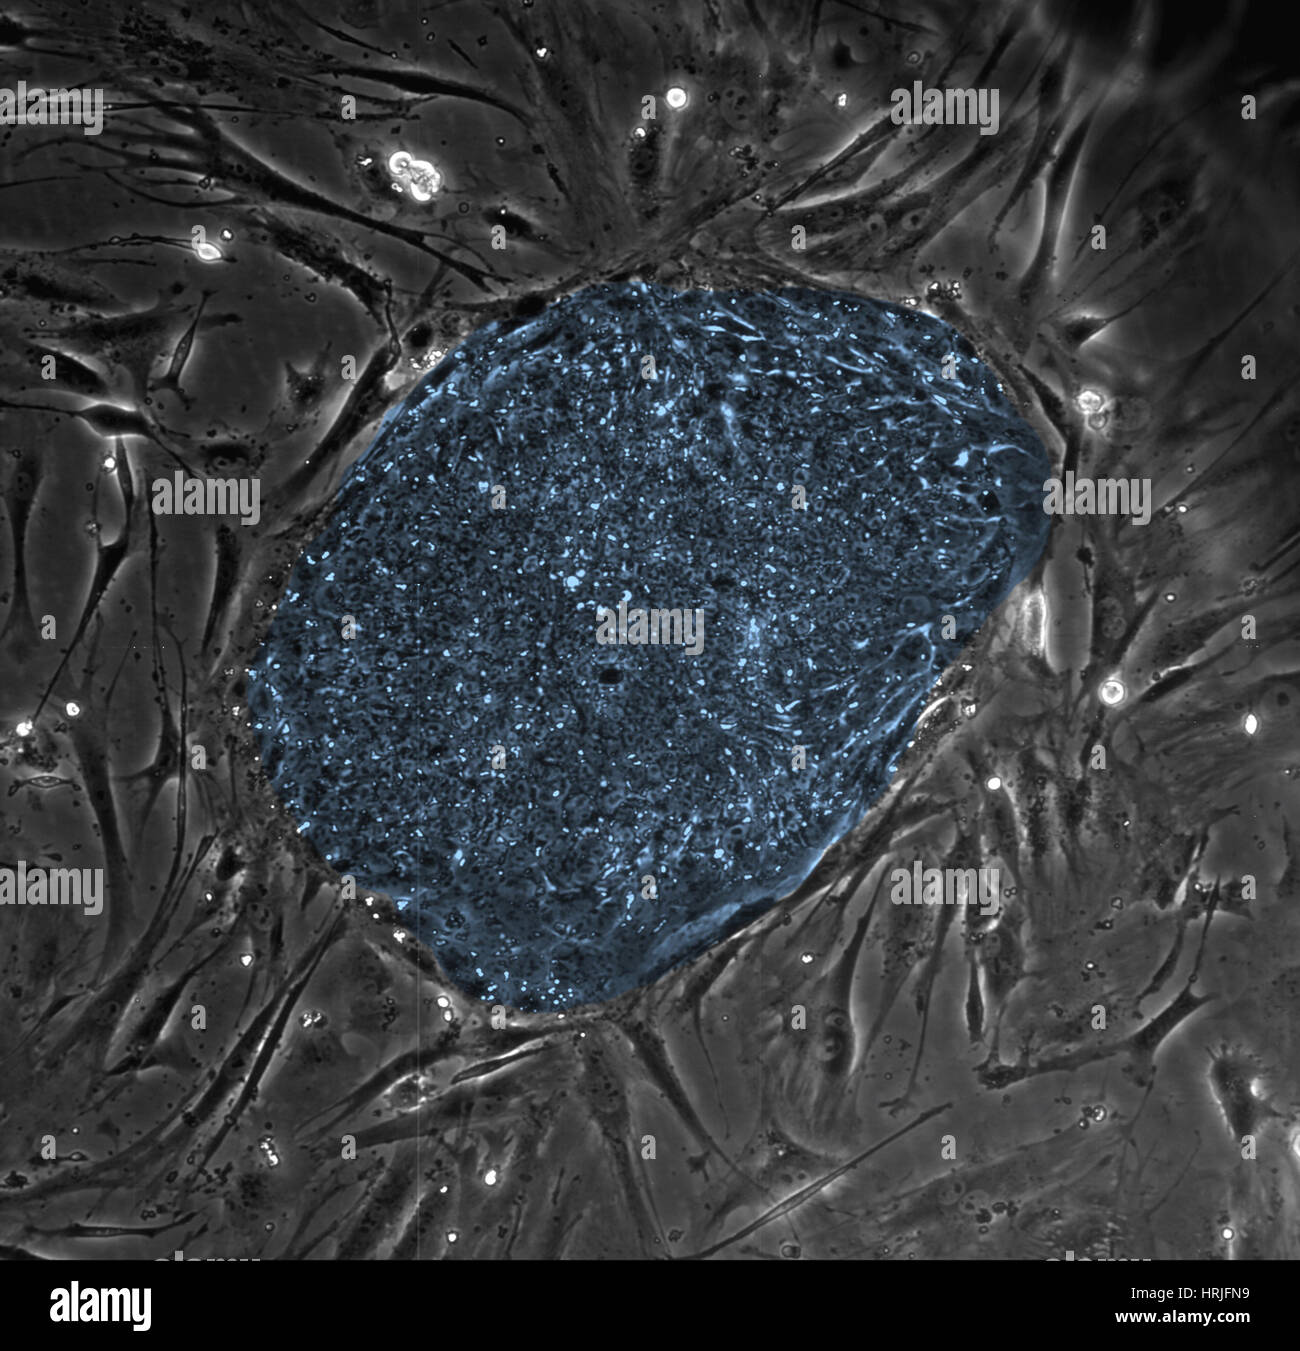 Human Embryonic Stem Cells, LM Stock Photo